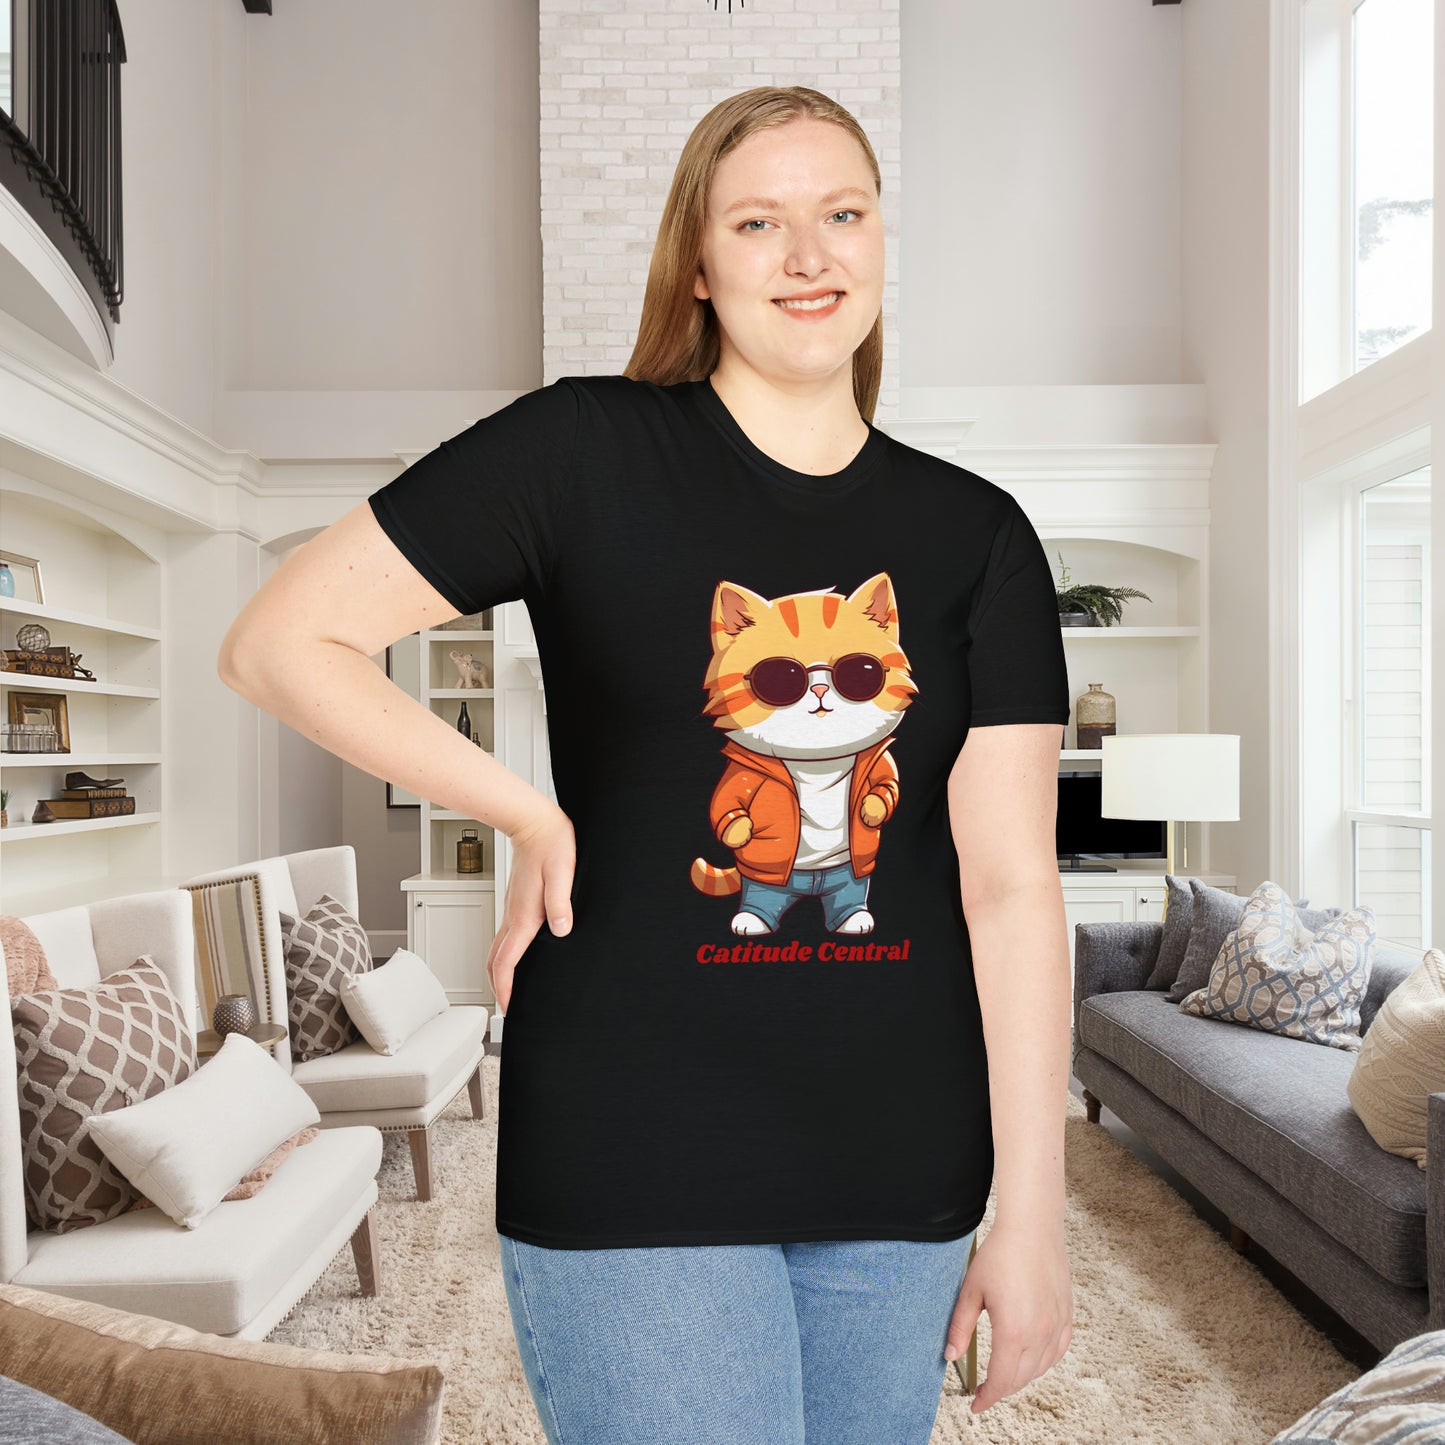 A cool cat with  “Catitude Central” below it on this Unisex Softstyle T-Shirt. Cat lovers get this.